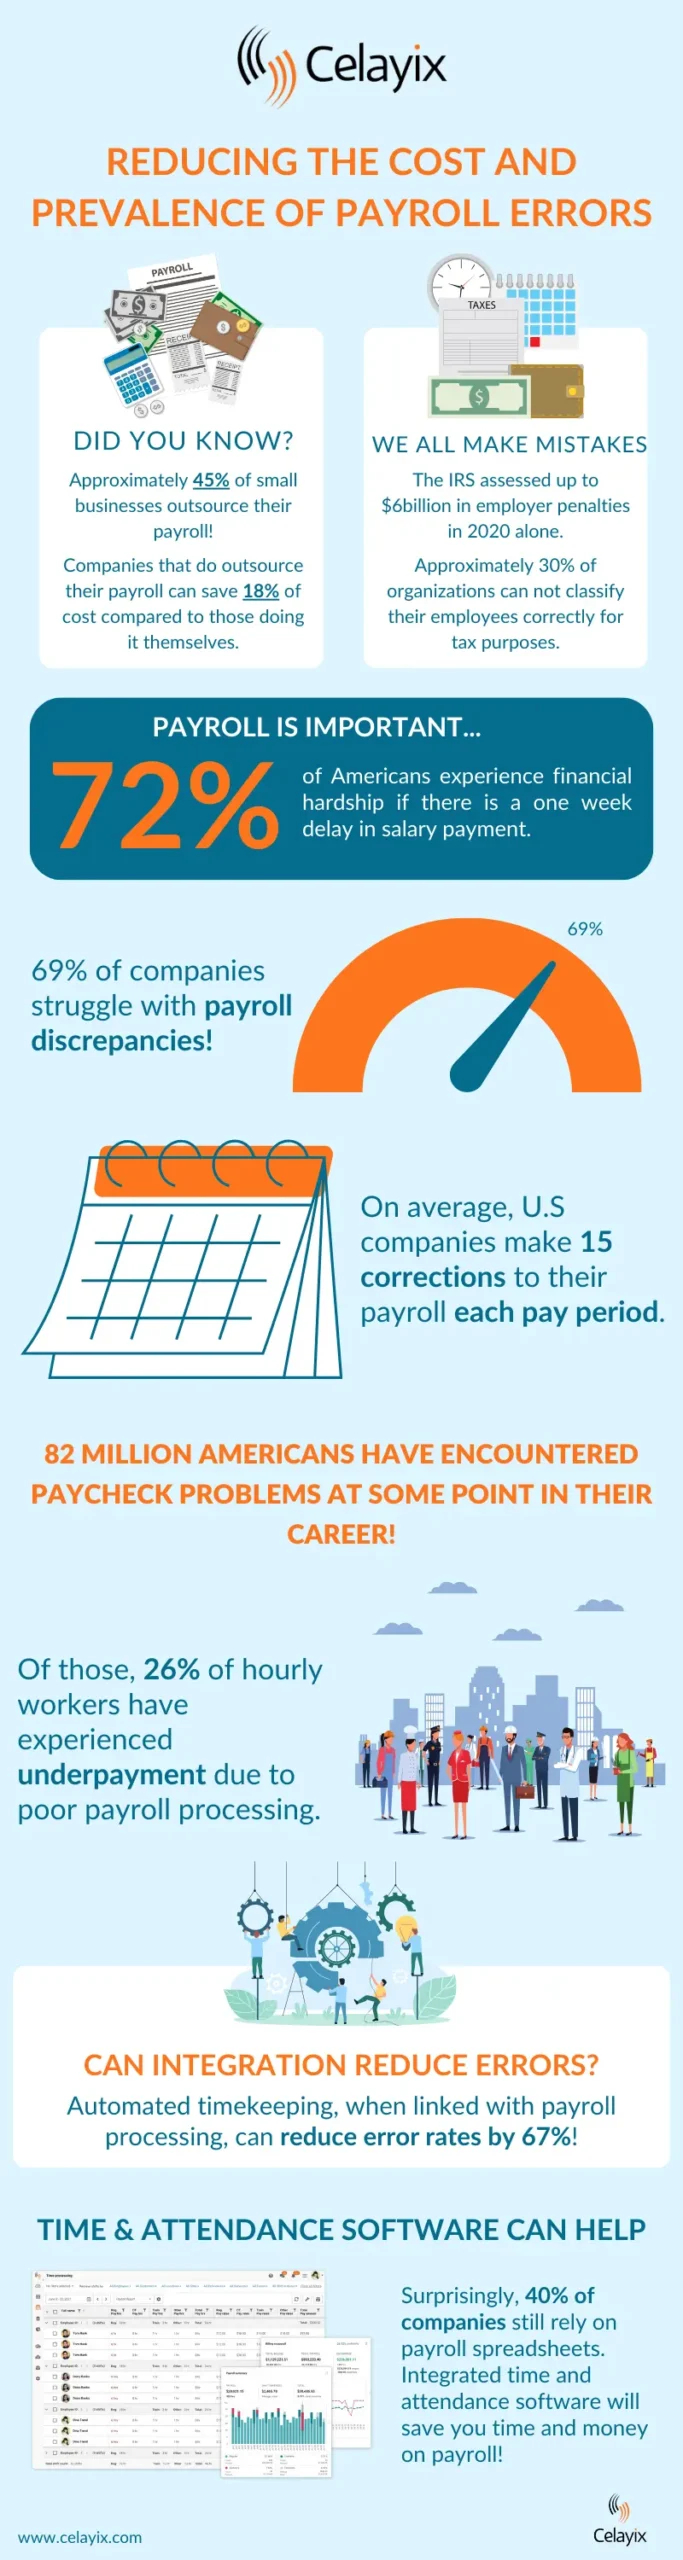 infographic detailing payroll errors